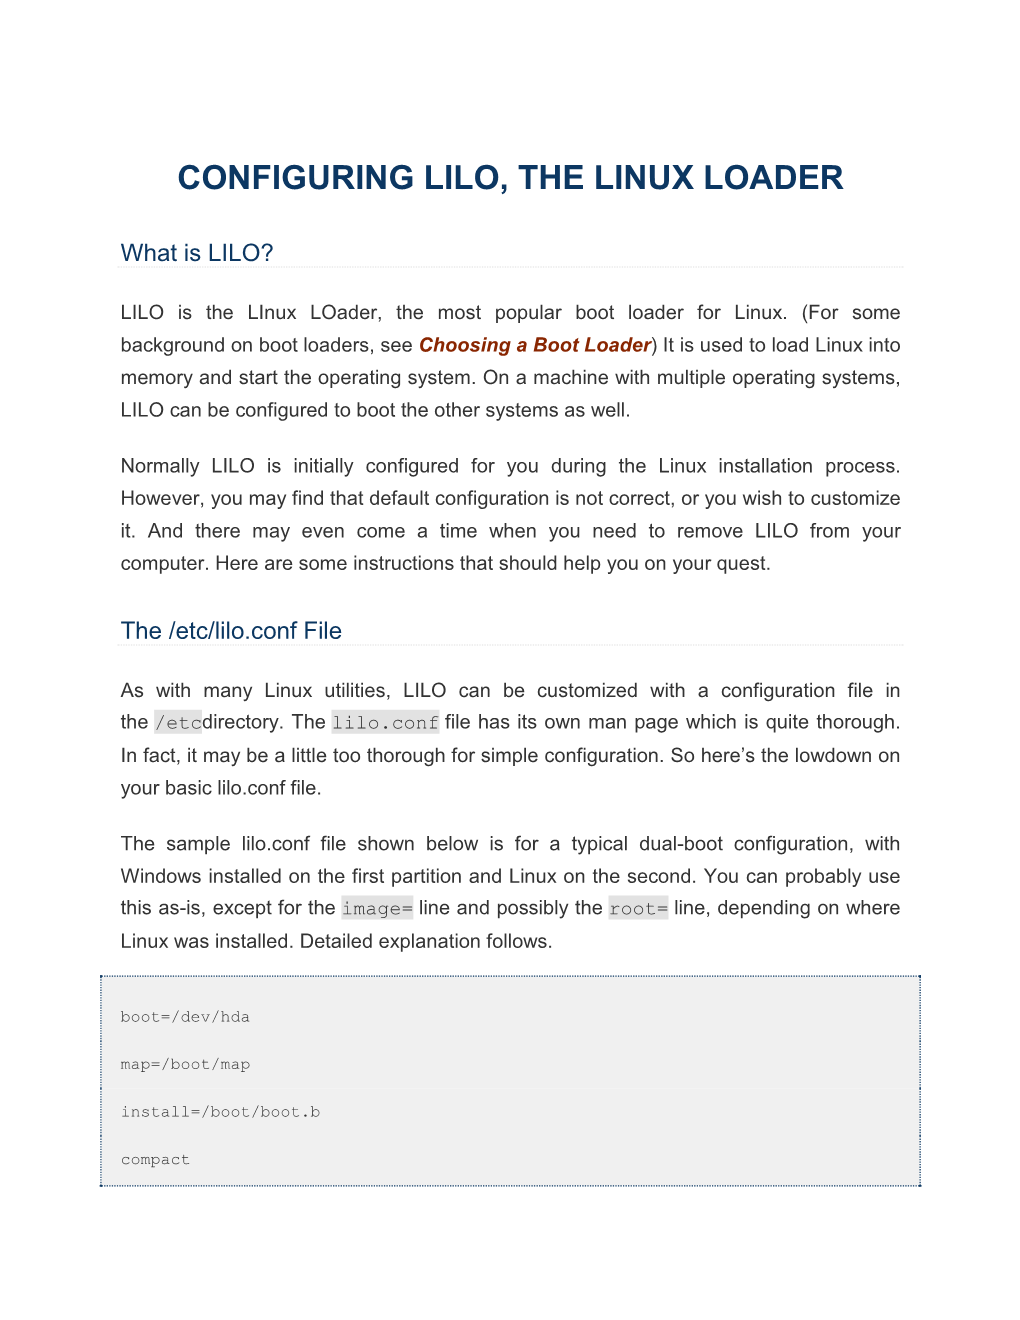 Configuring Lilo, the Linux Loader